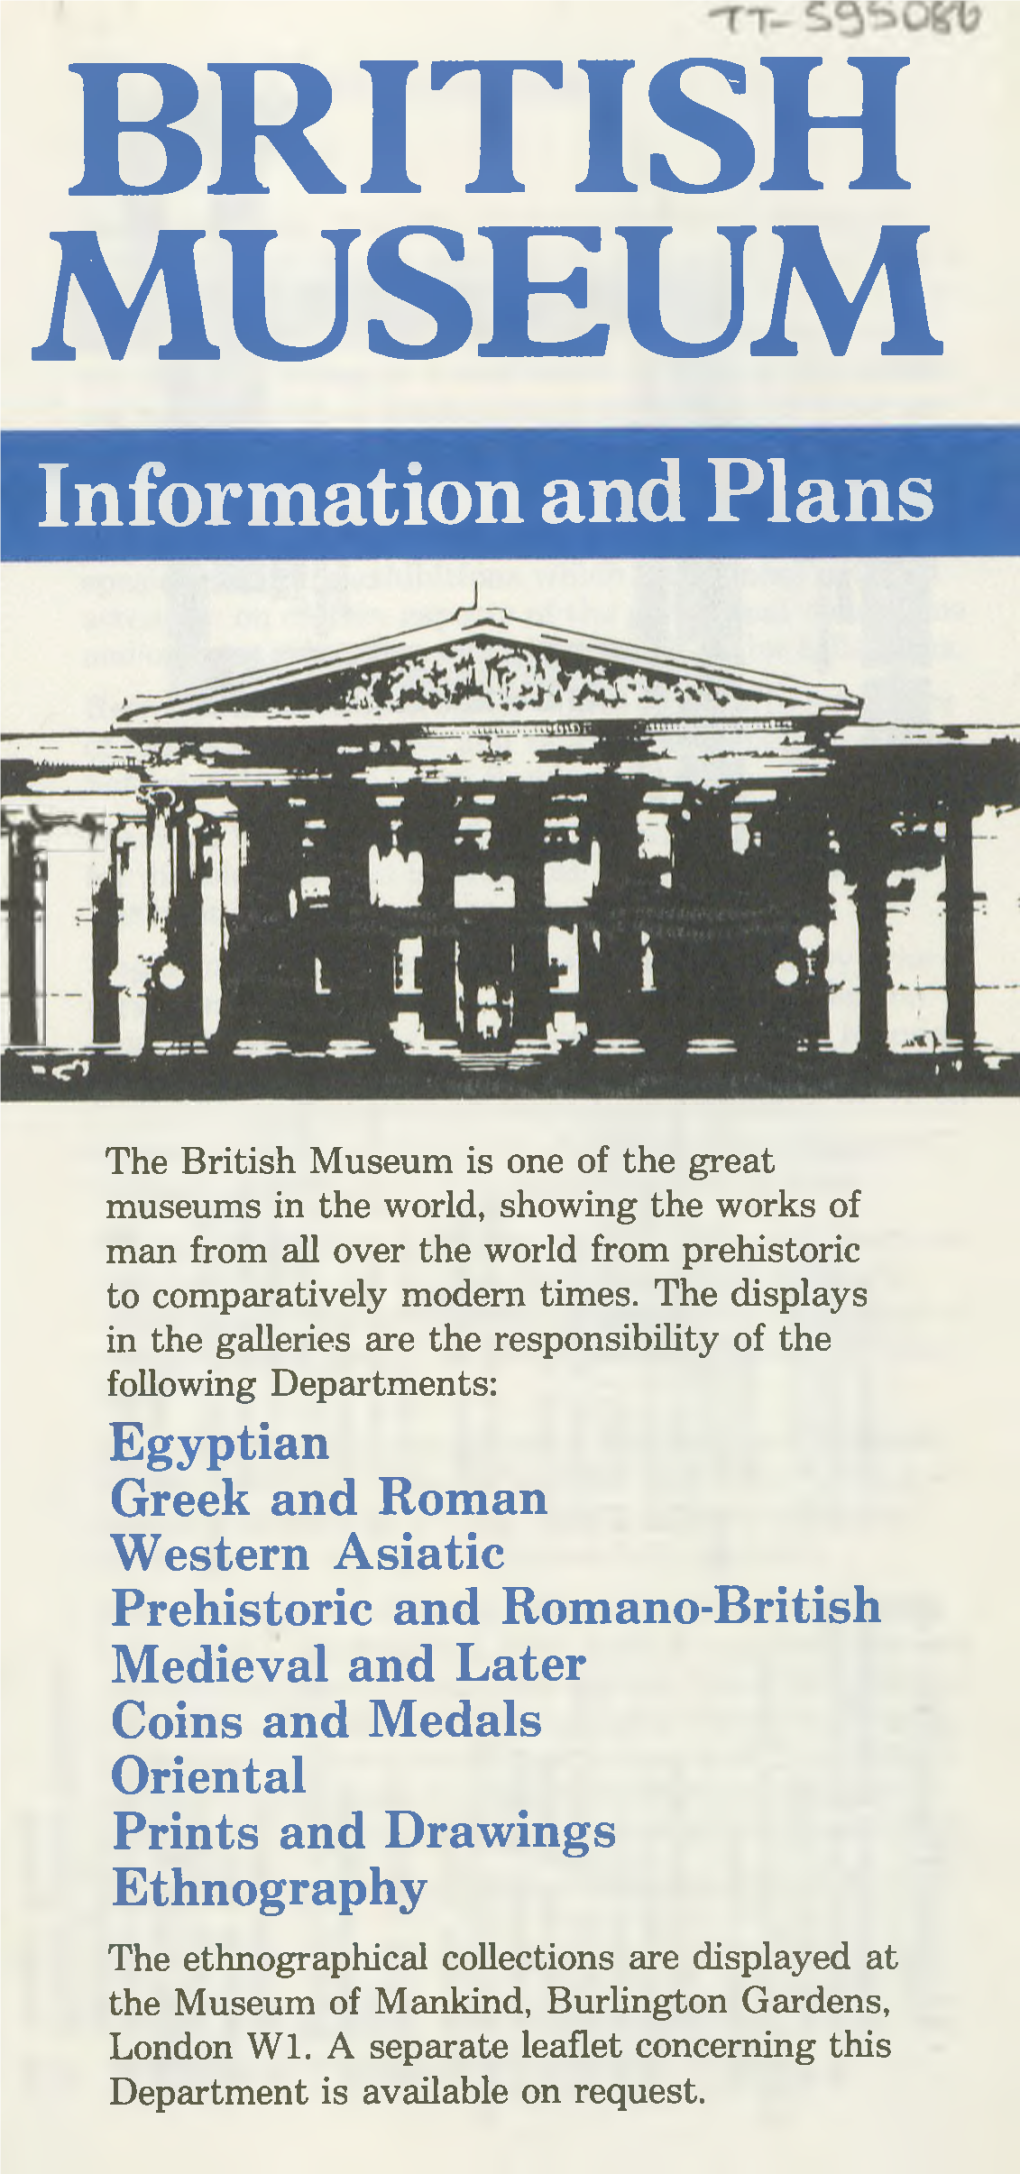 BRITISH MUSEUM Information and Plans